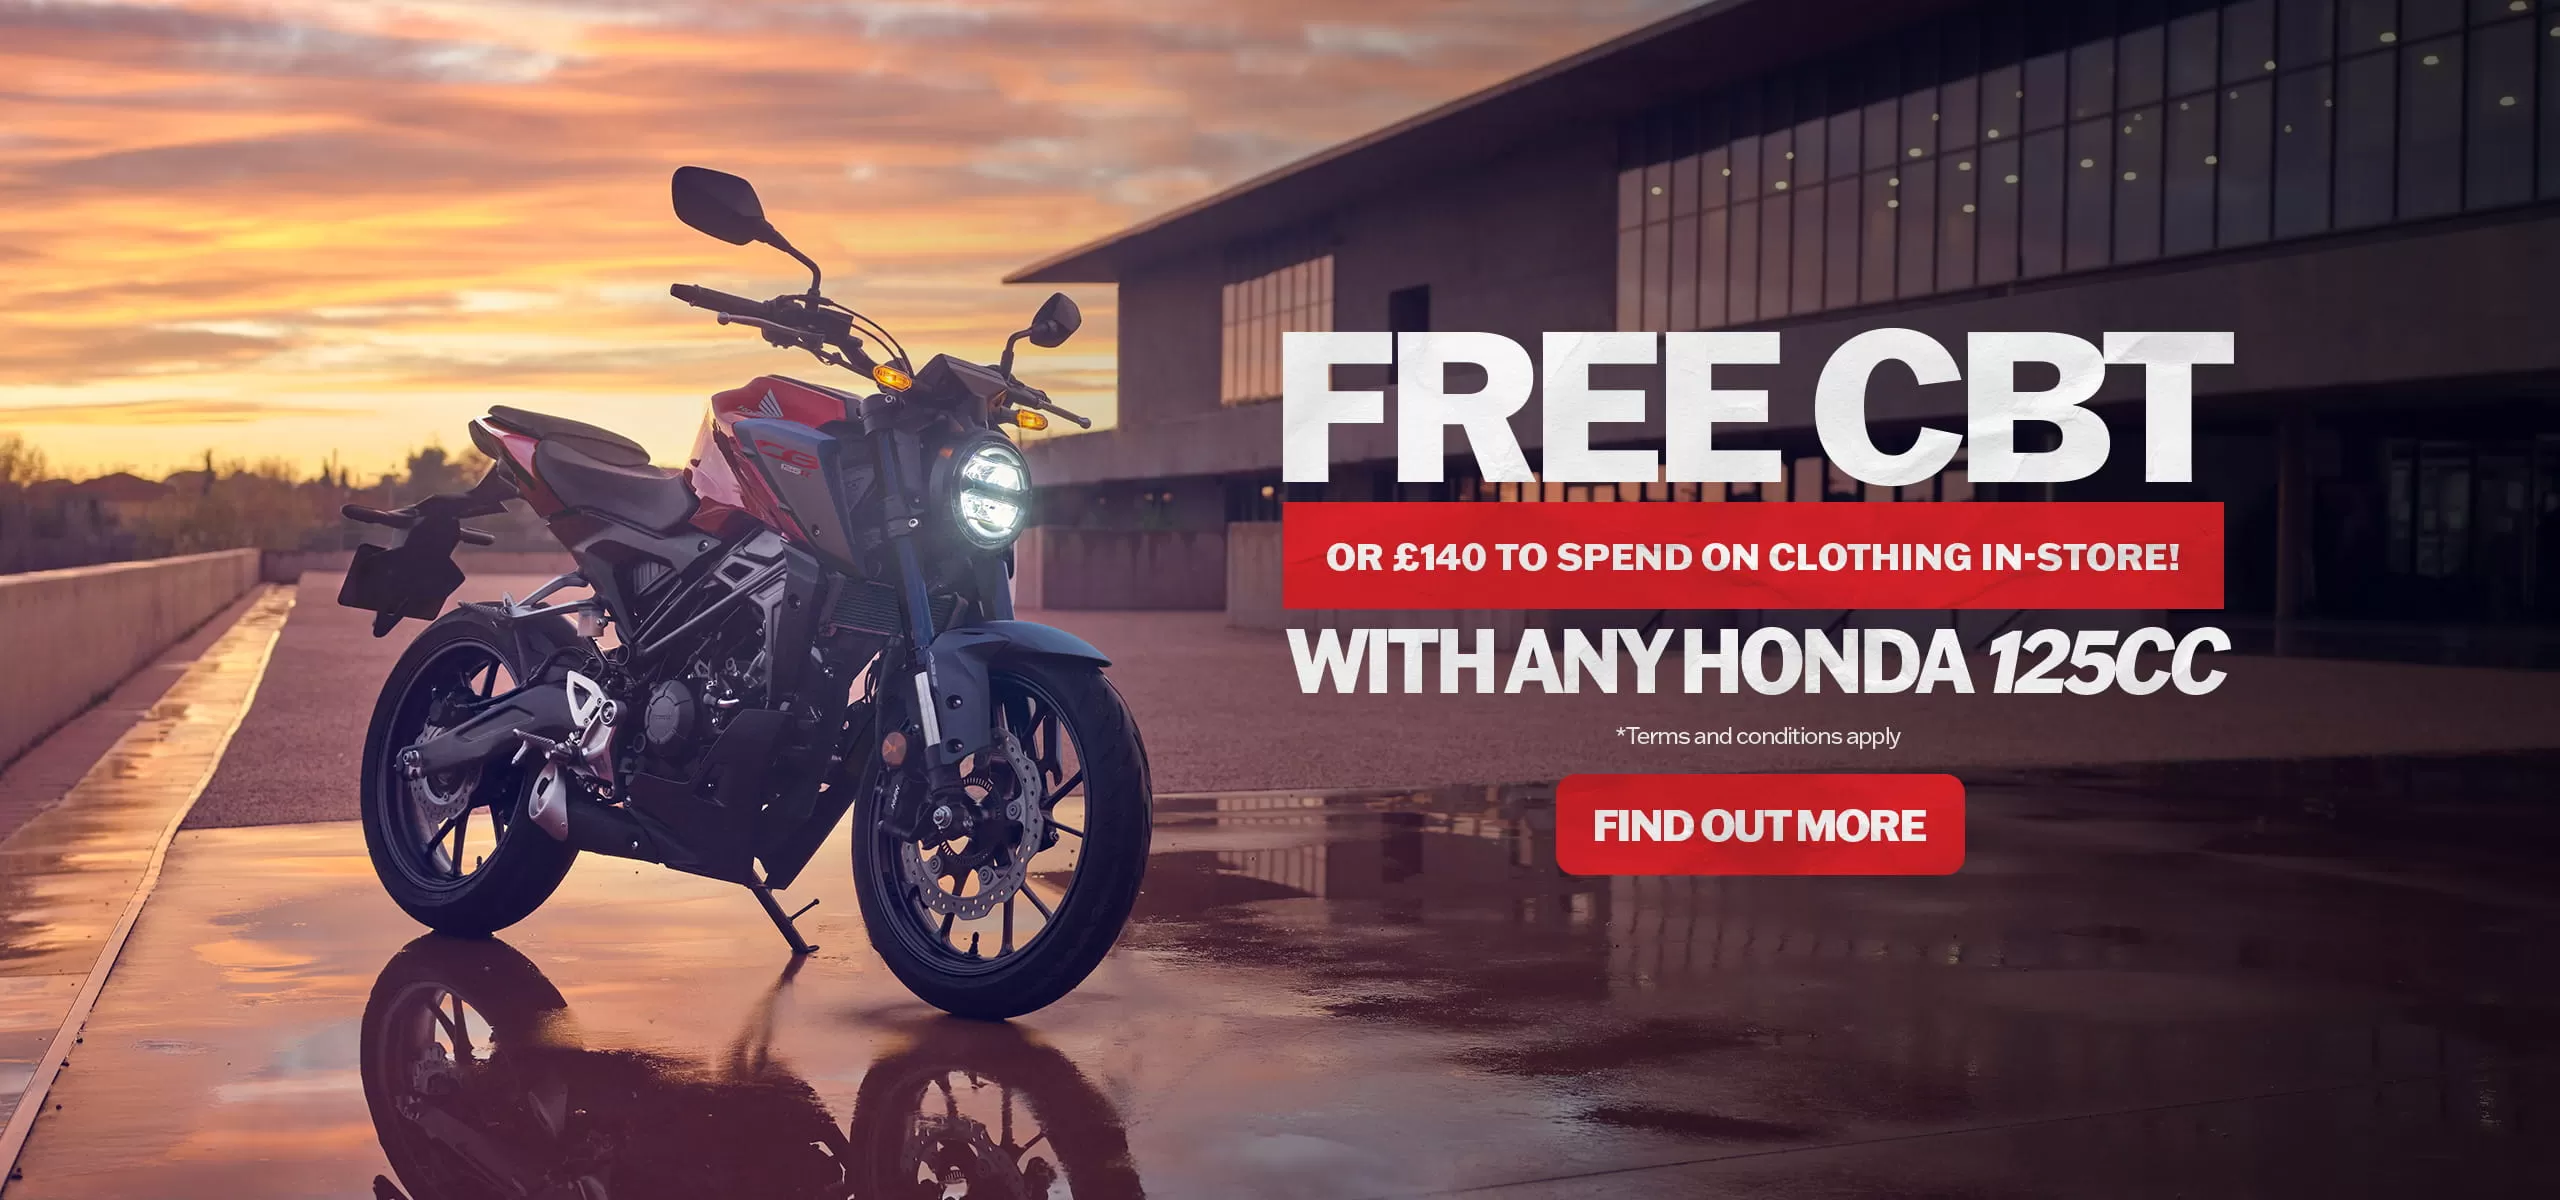 Damerells Motorcycles Offers Free CBT or Clothing Voucher with New Honda 125cc Purchase in April